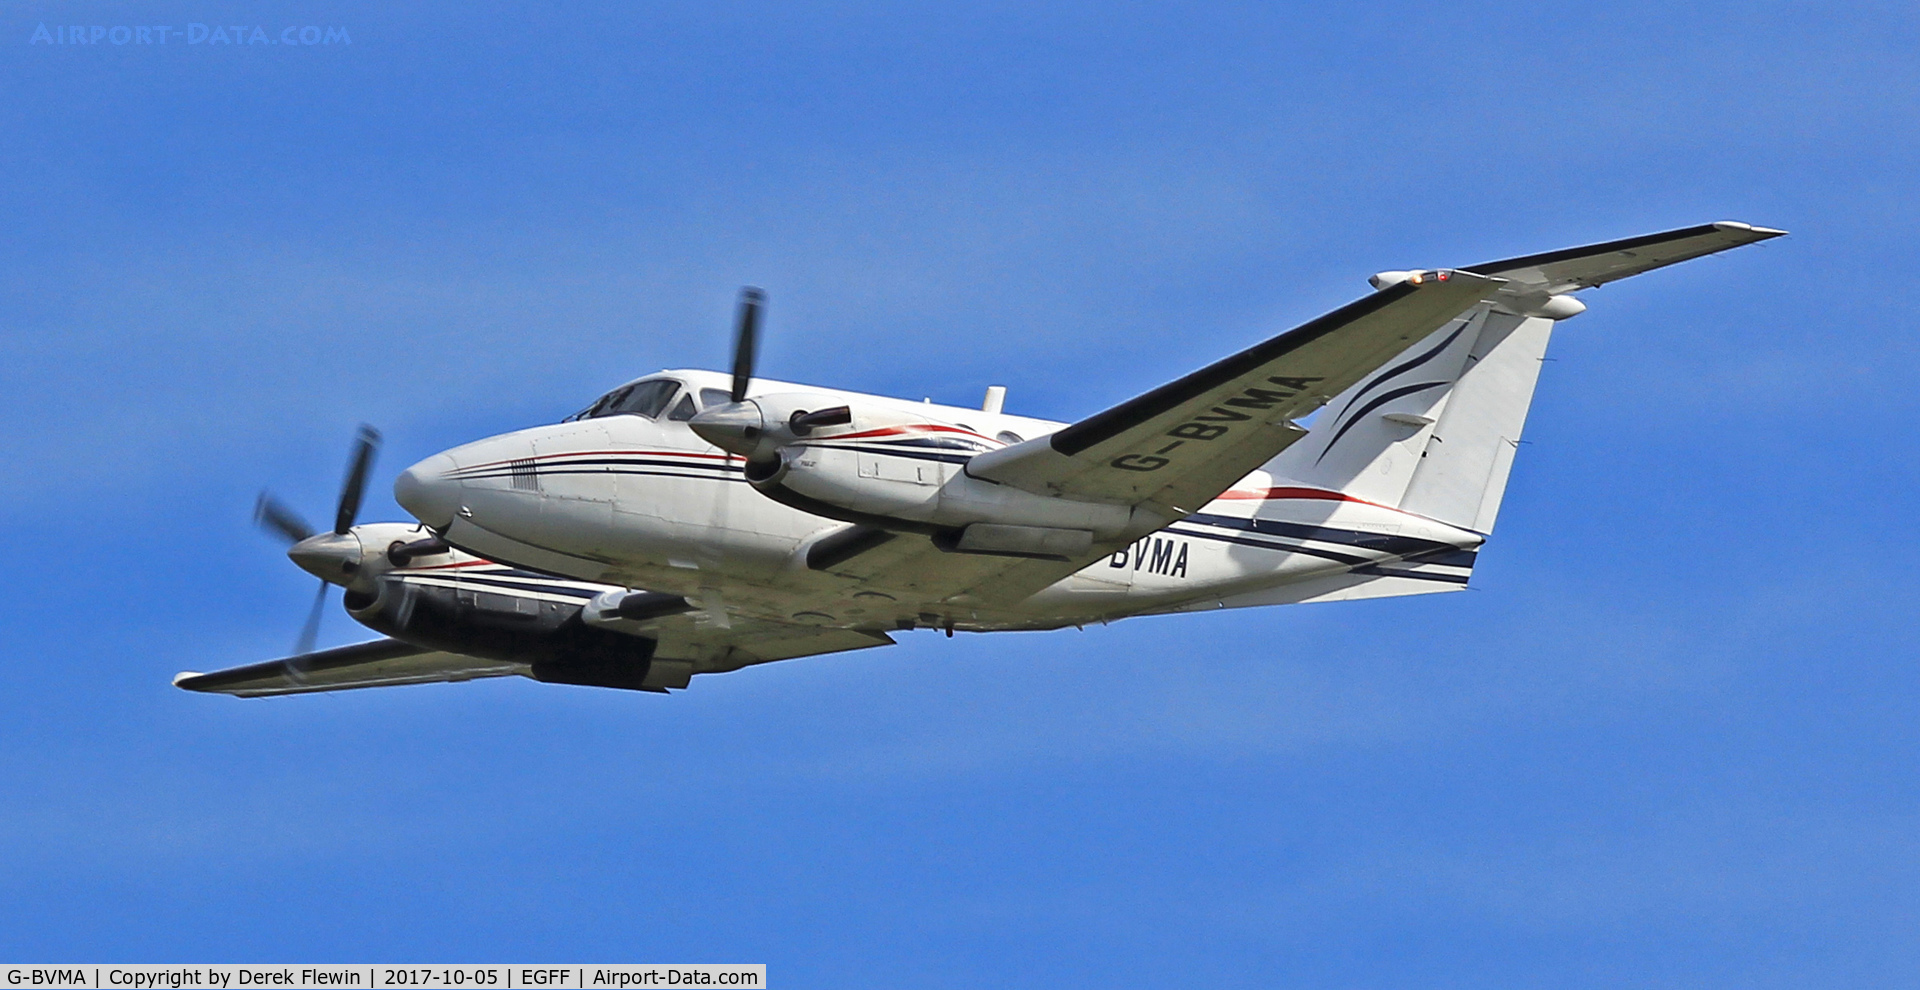 G-BVMA, 1980 Beech 200 Super King Air C/N BB-797, Beech 200, Dragonfly Aviation Services Ltd, Cardiff based, low go round following a DME approach.